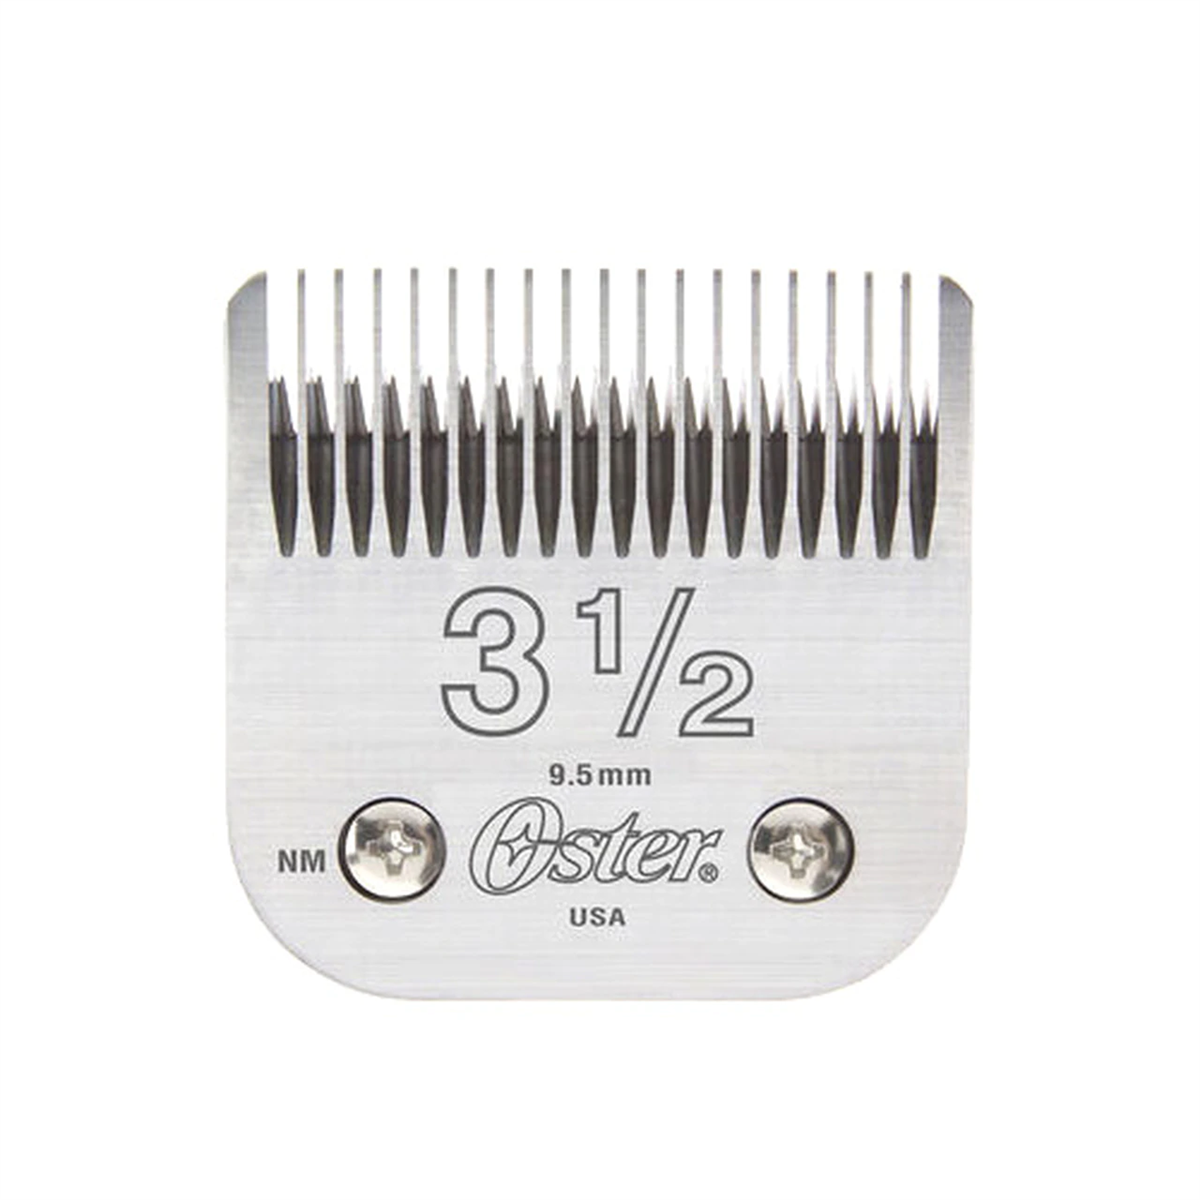 OSTER Classic 76 Hair Clipper Blades All Sizes, 3 1/2